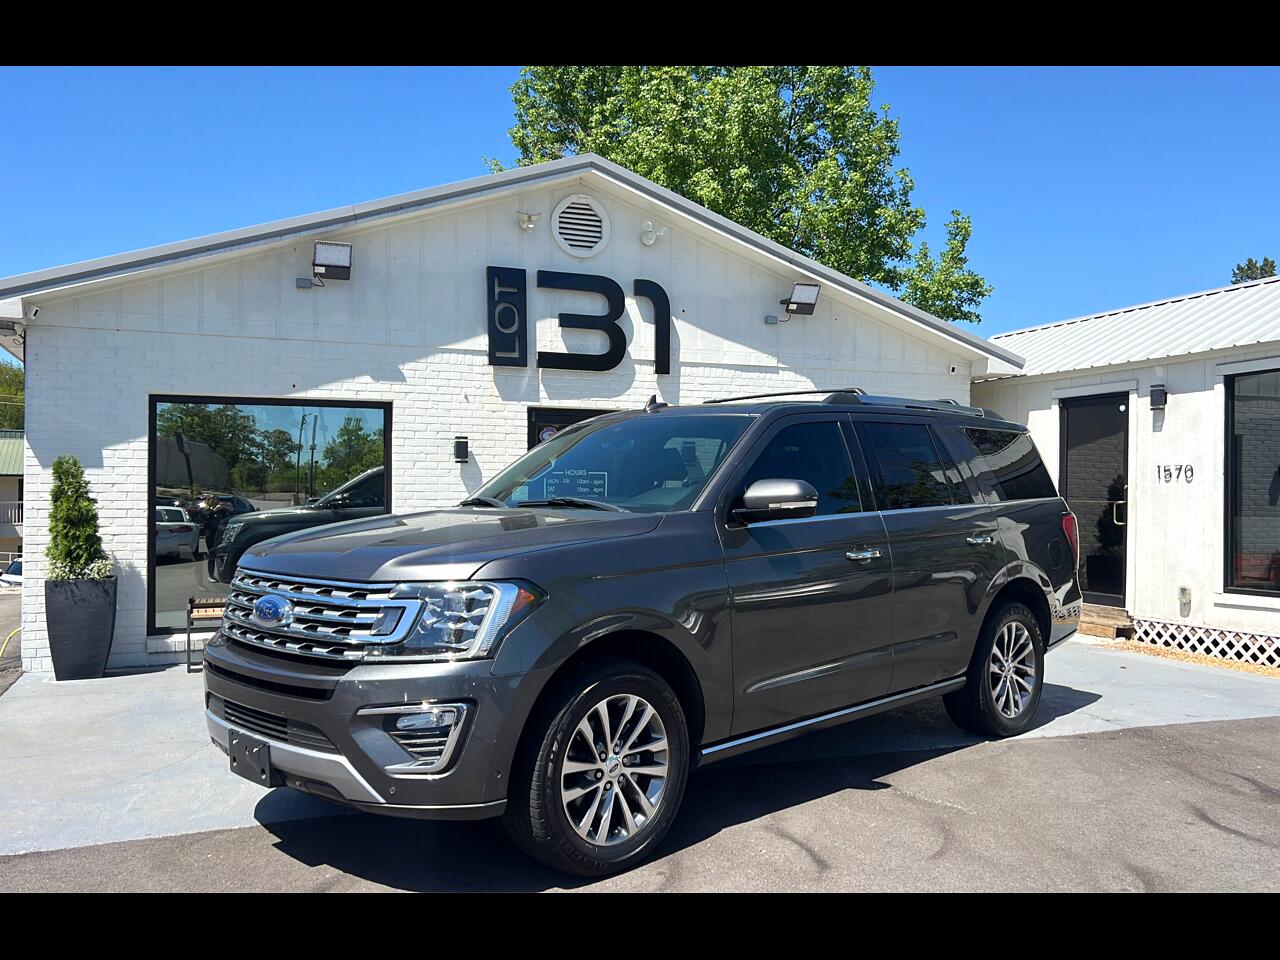 2018 Ford Expedition Limited 2WD